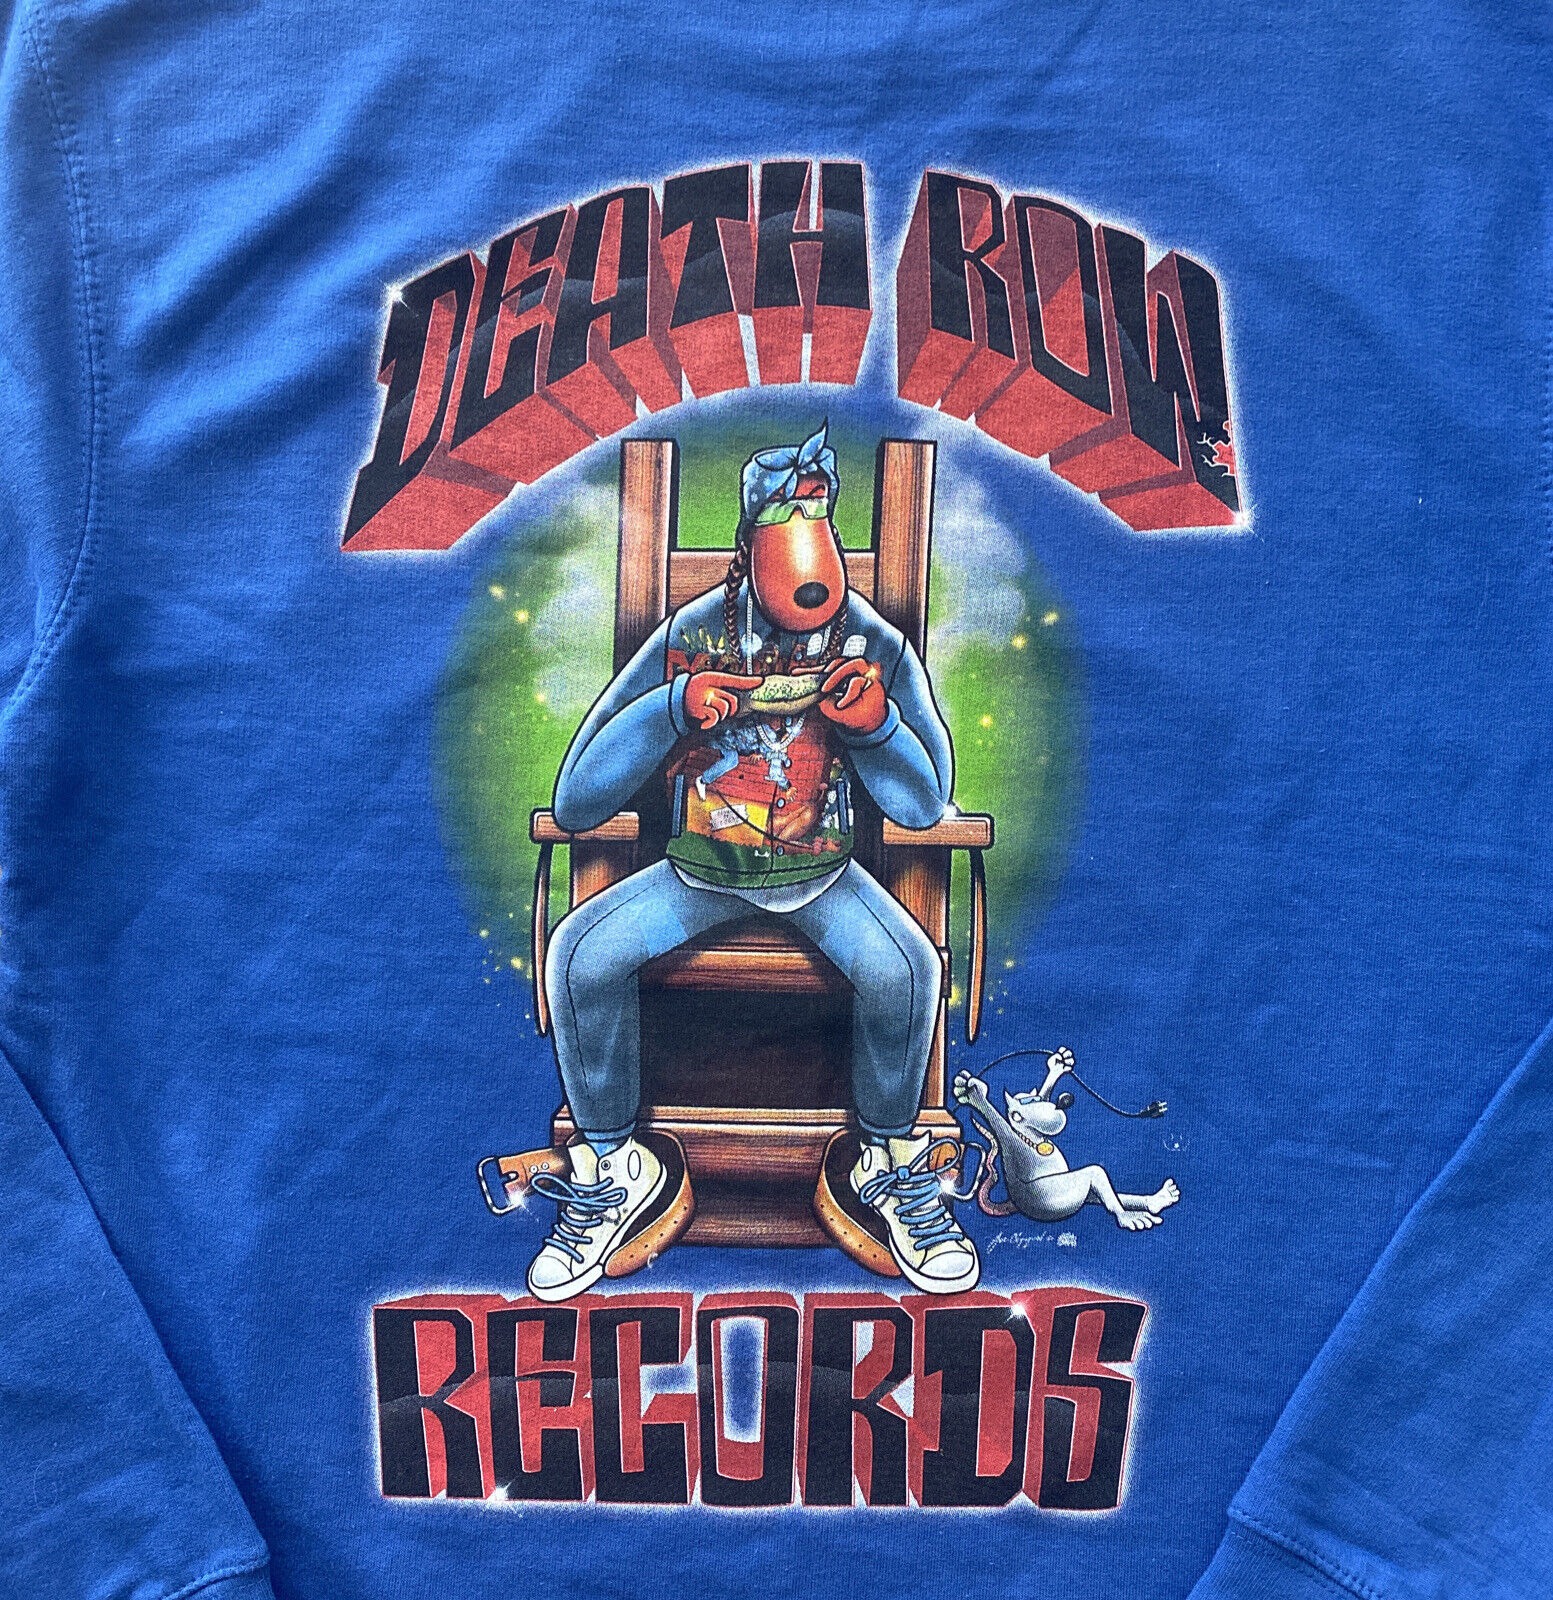 hot snoop dogg deathrow records concert sweater sk8bl